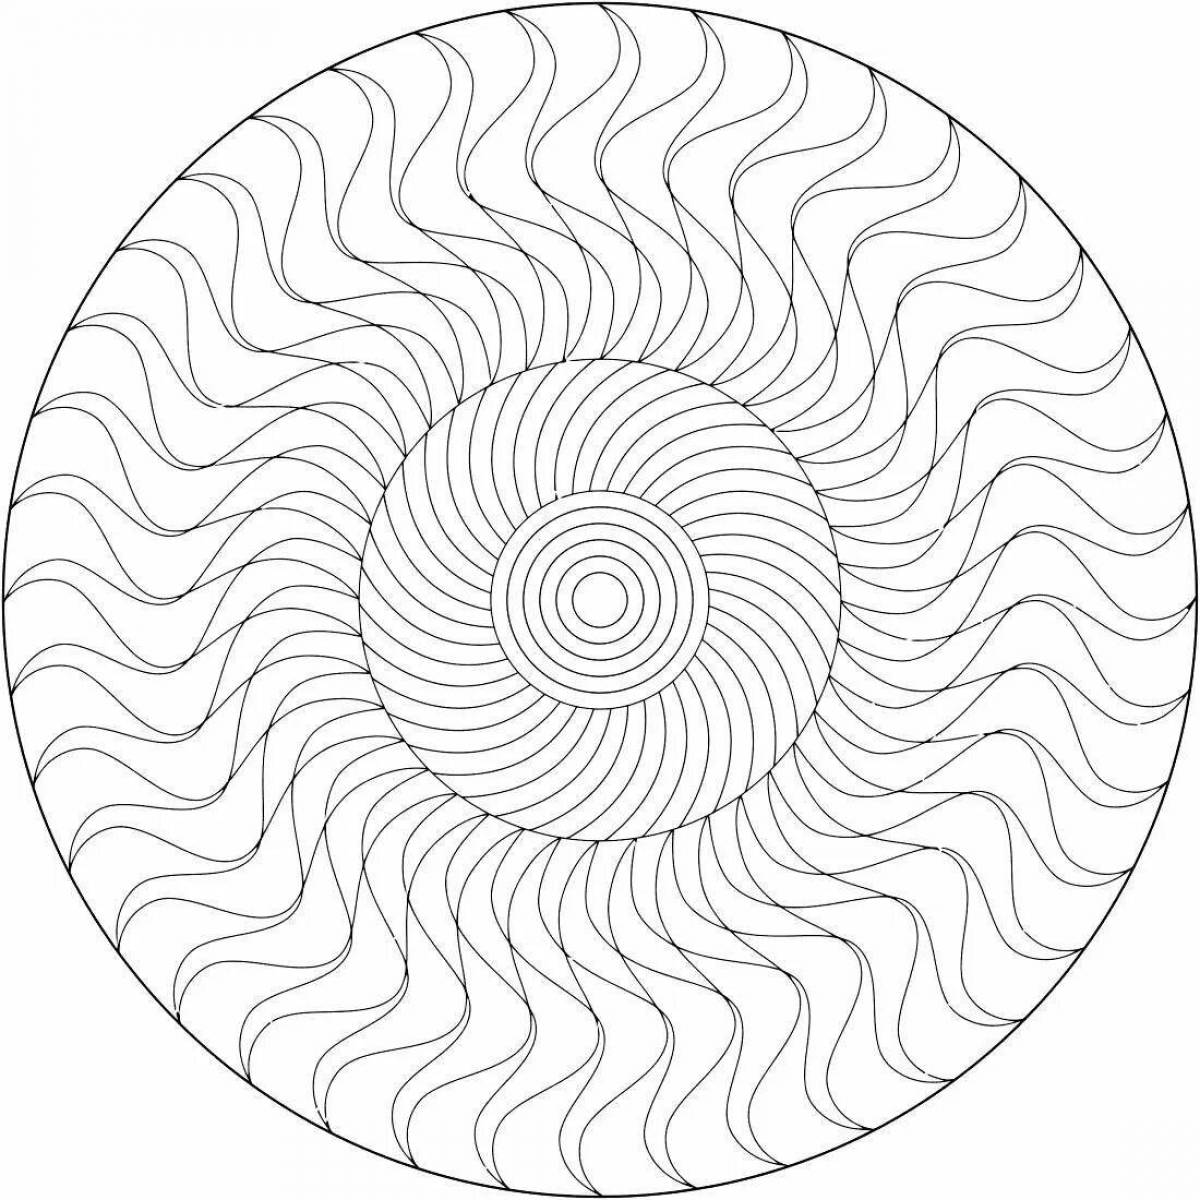 Bold spiral coloring